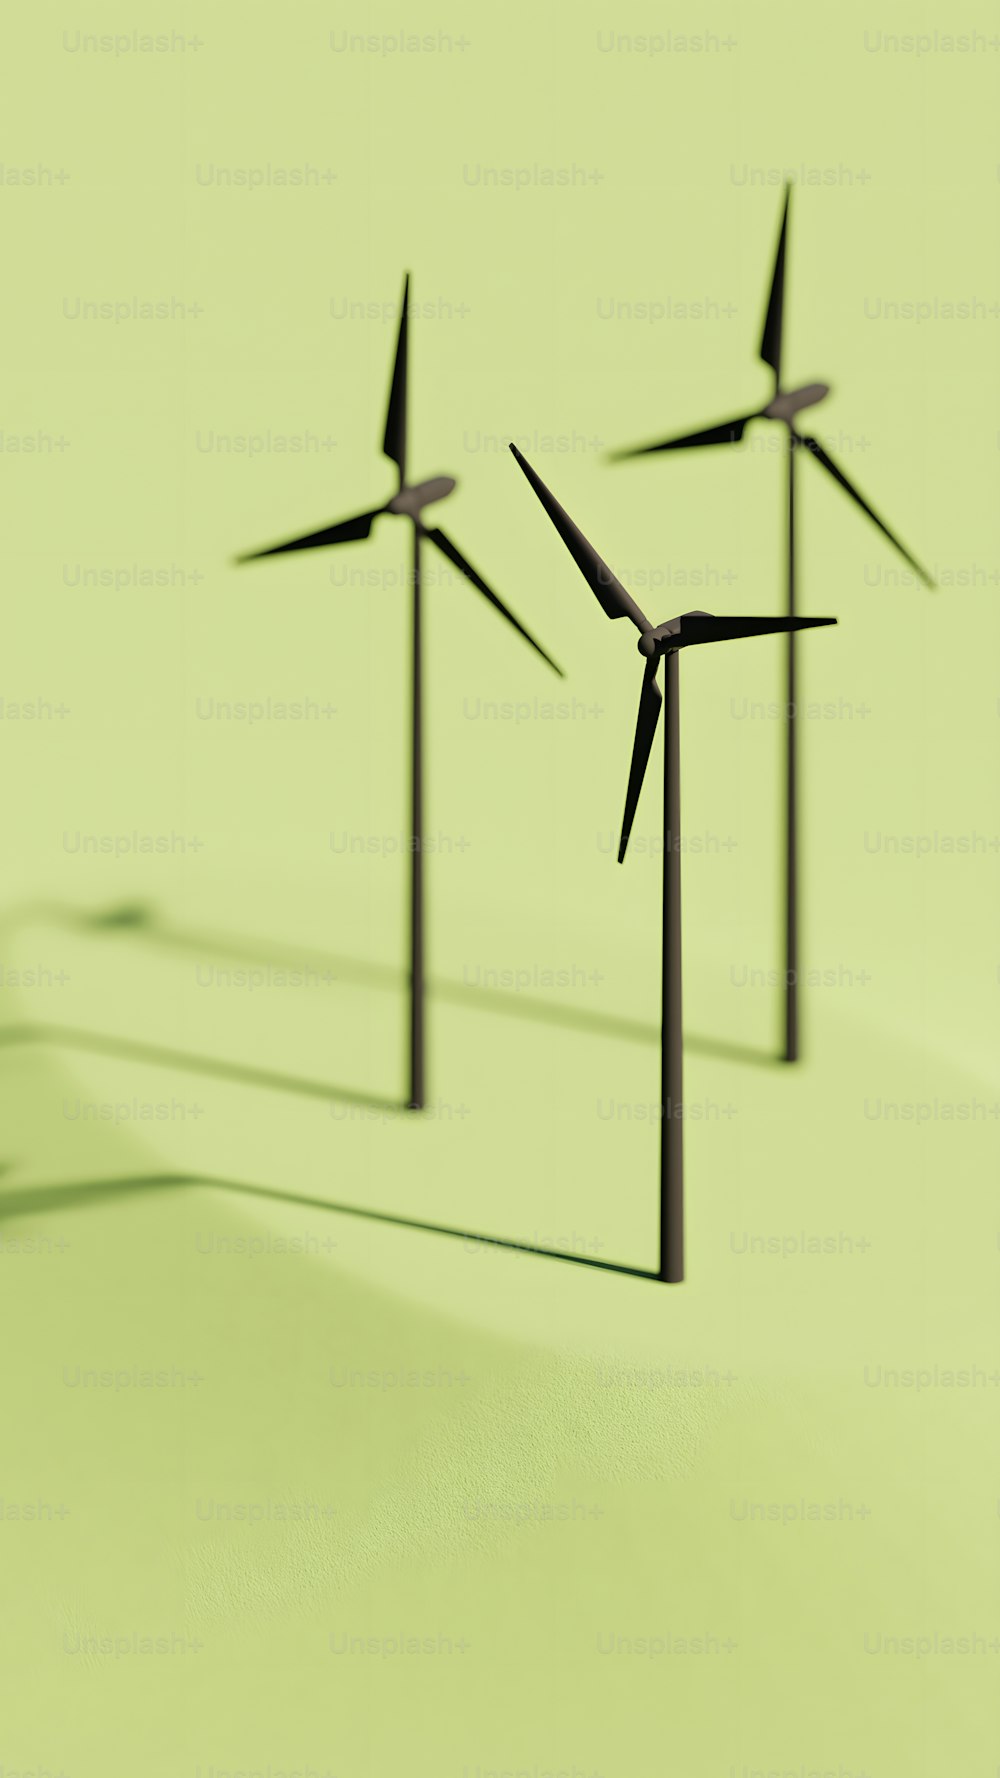 a group of three wind turbines on a green surface